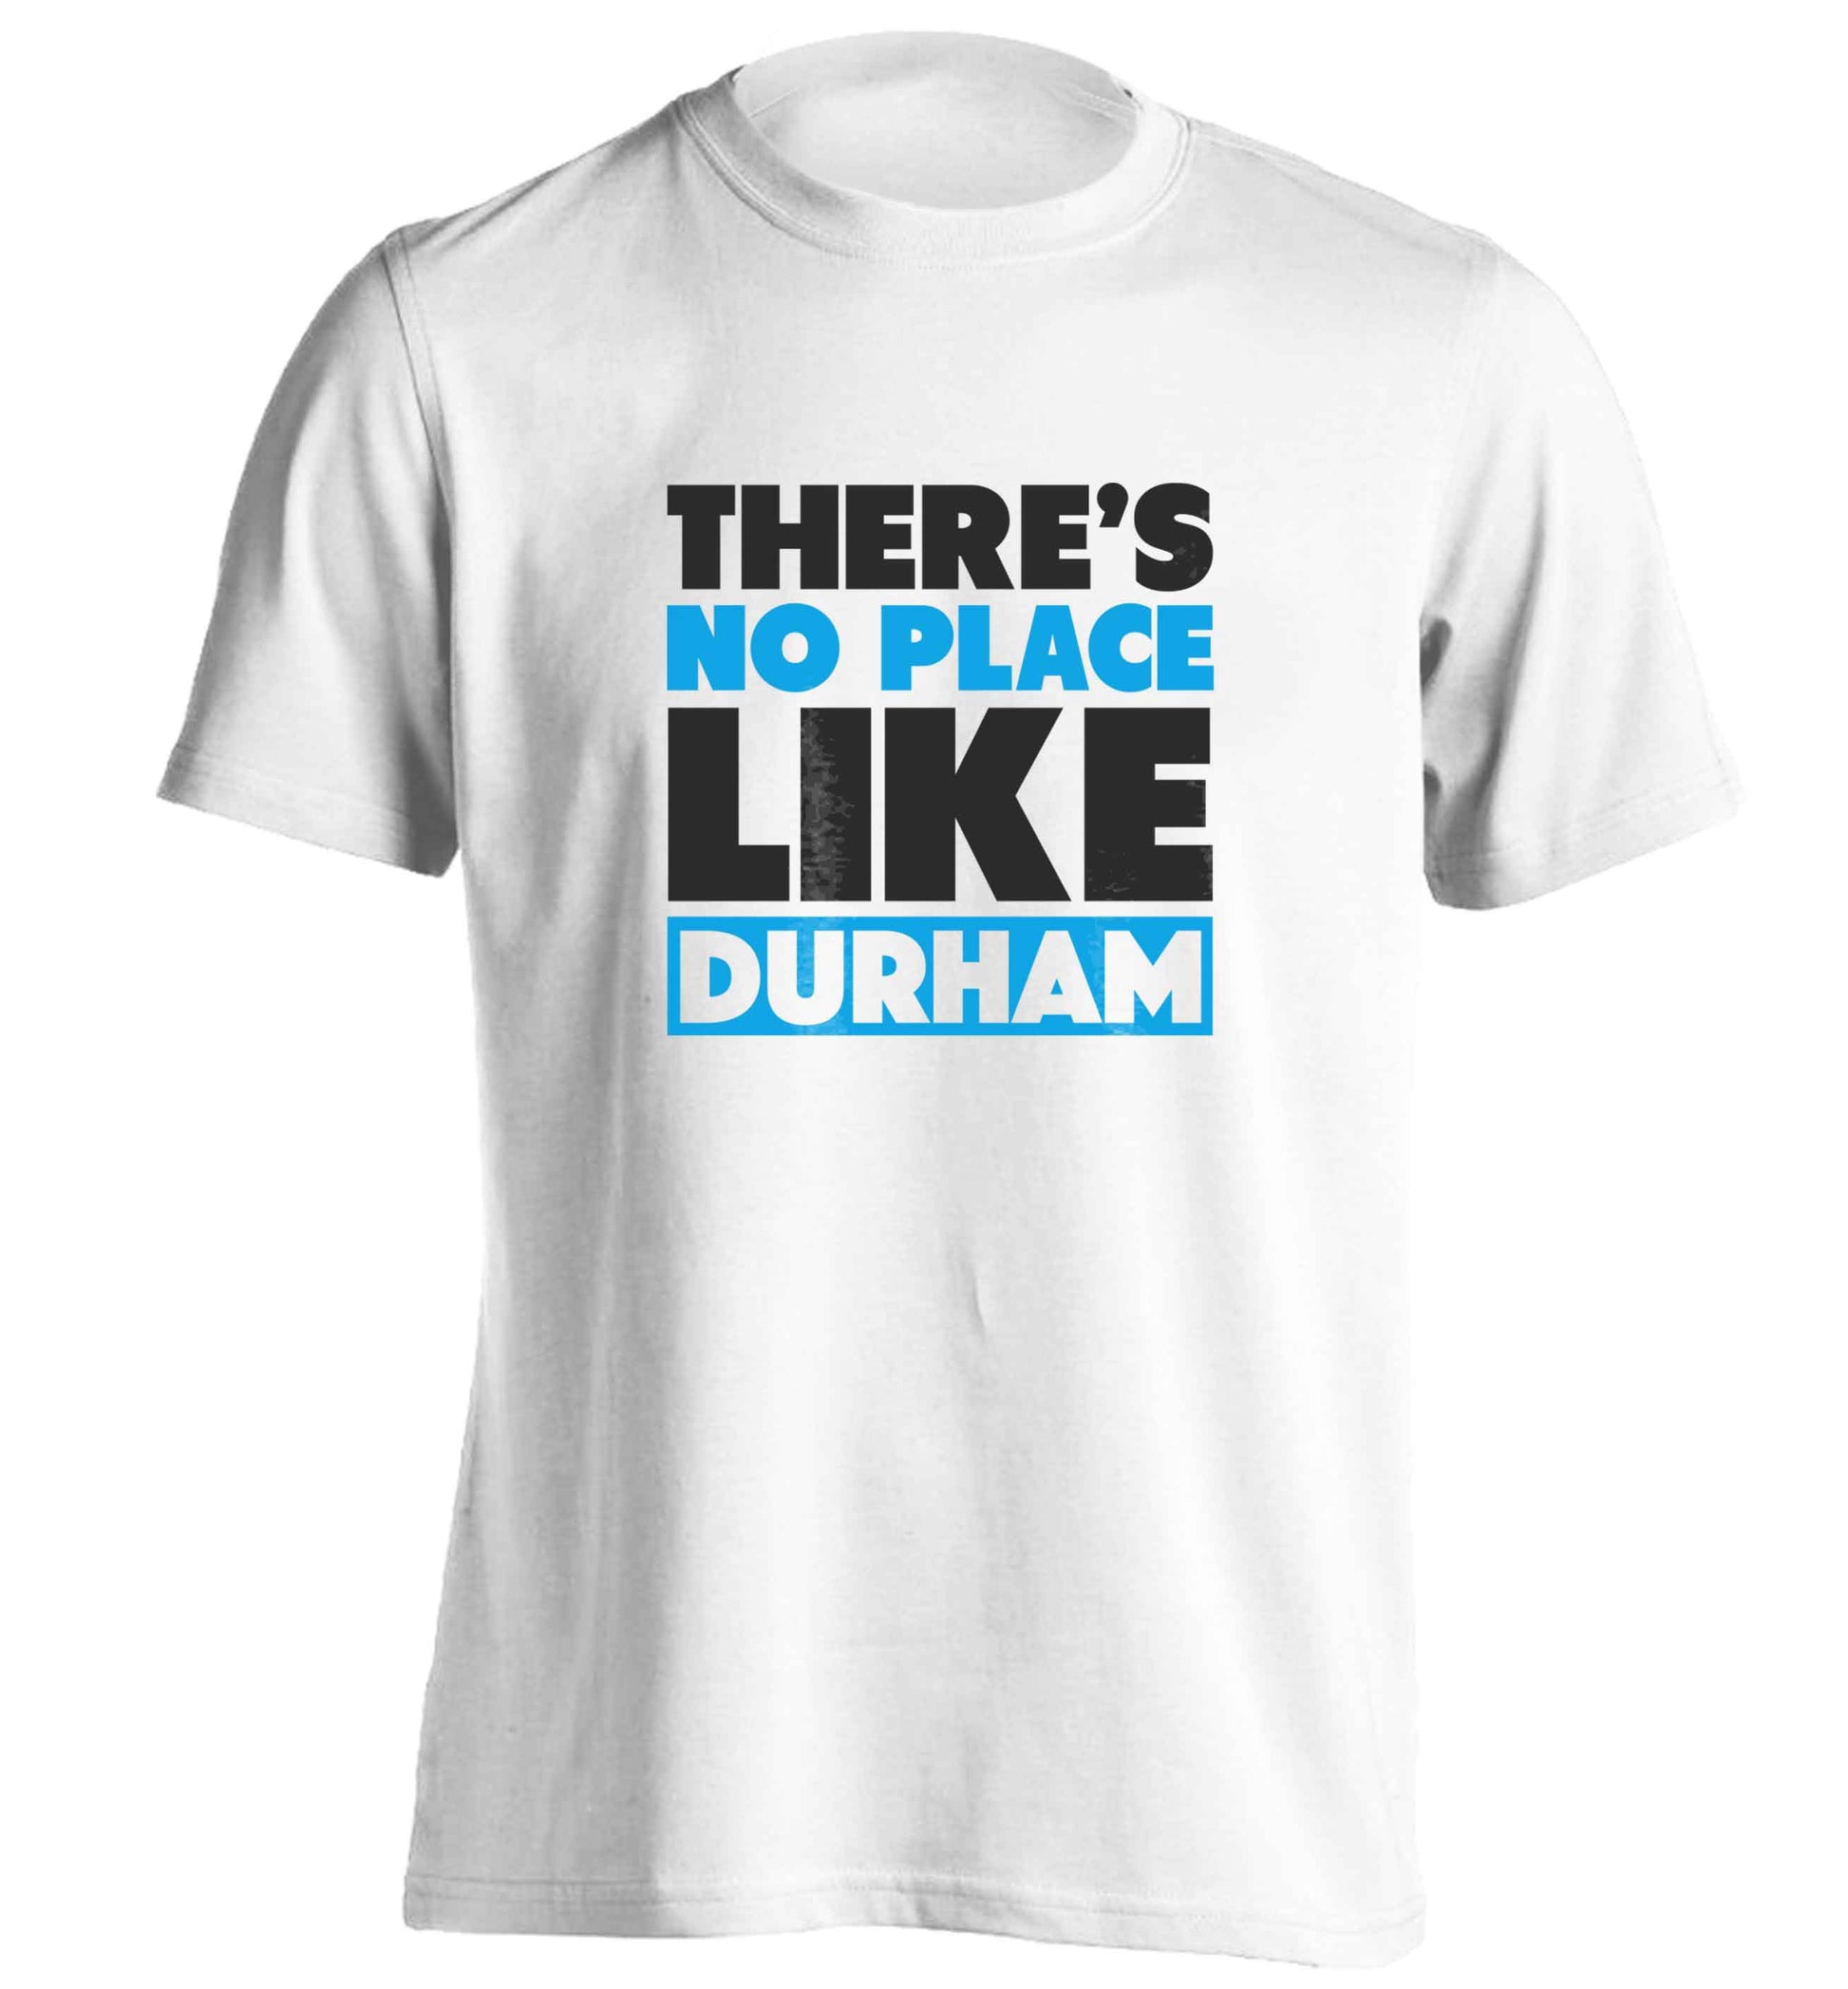 There's no place like Durham adults unisex white Tshirt 2XL